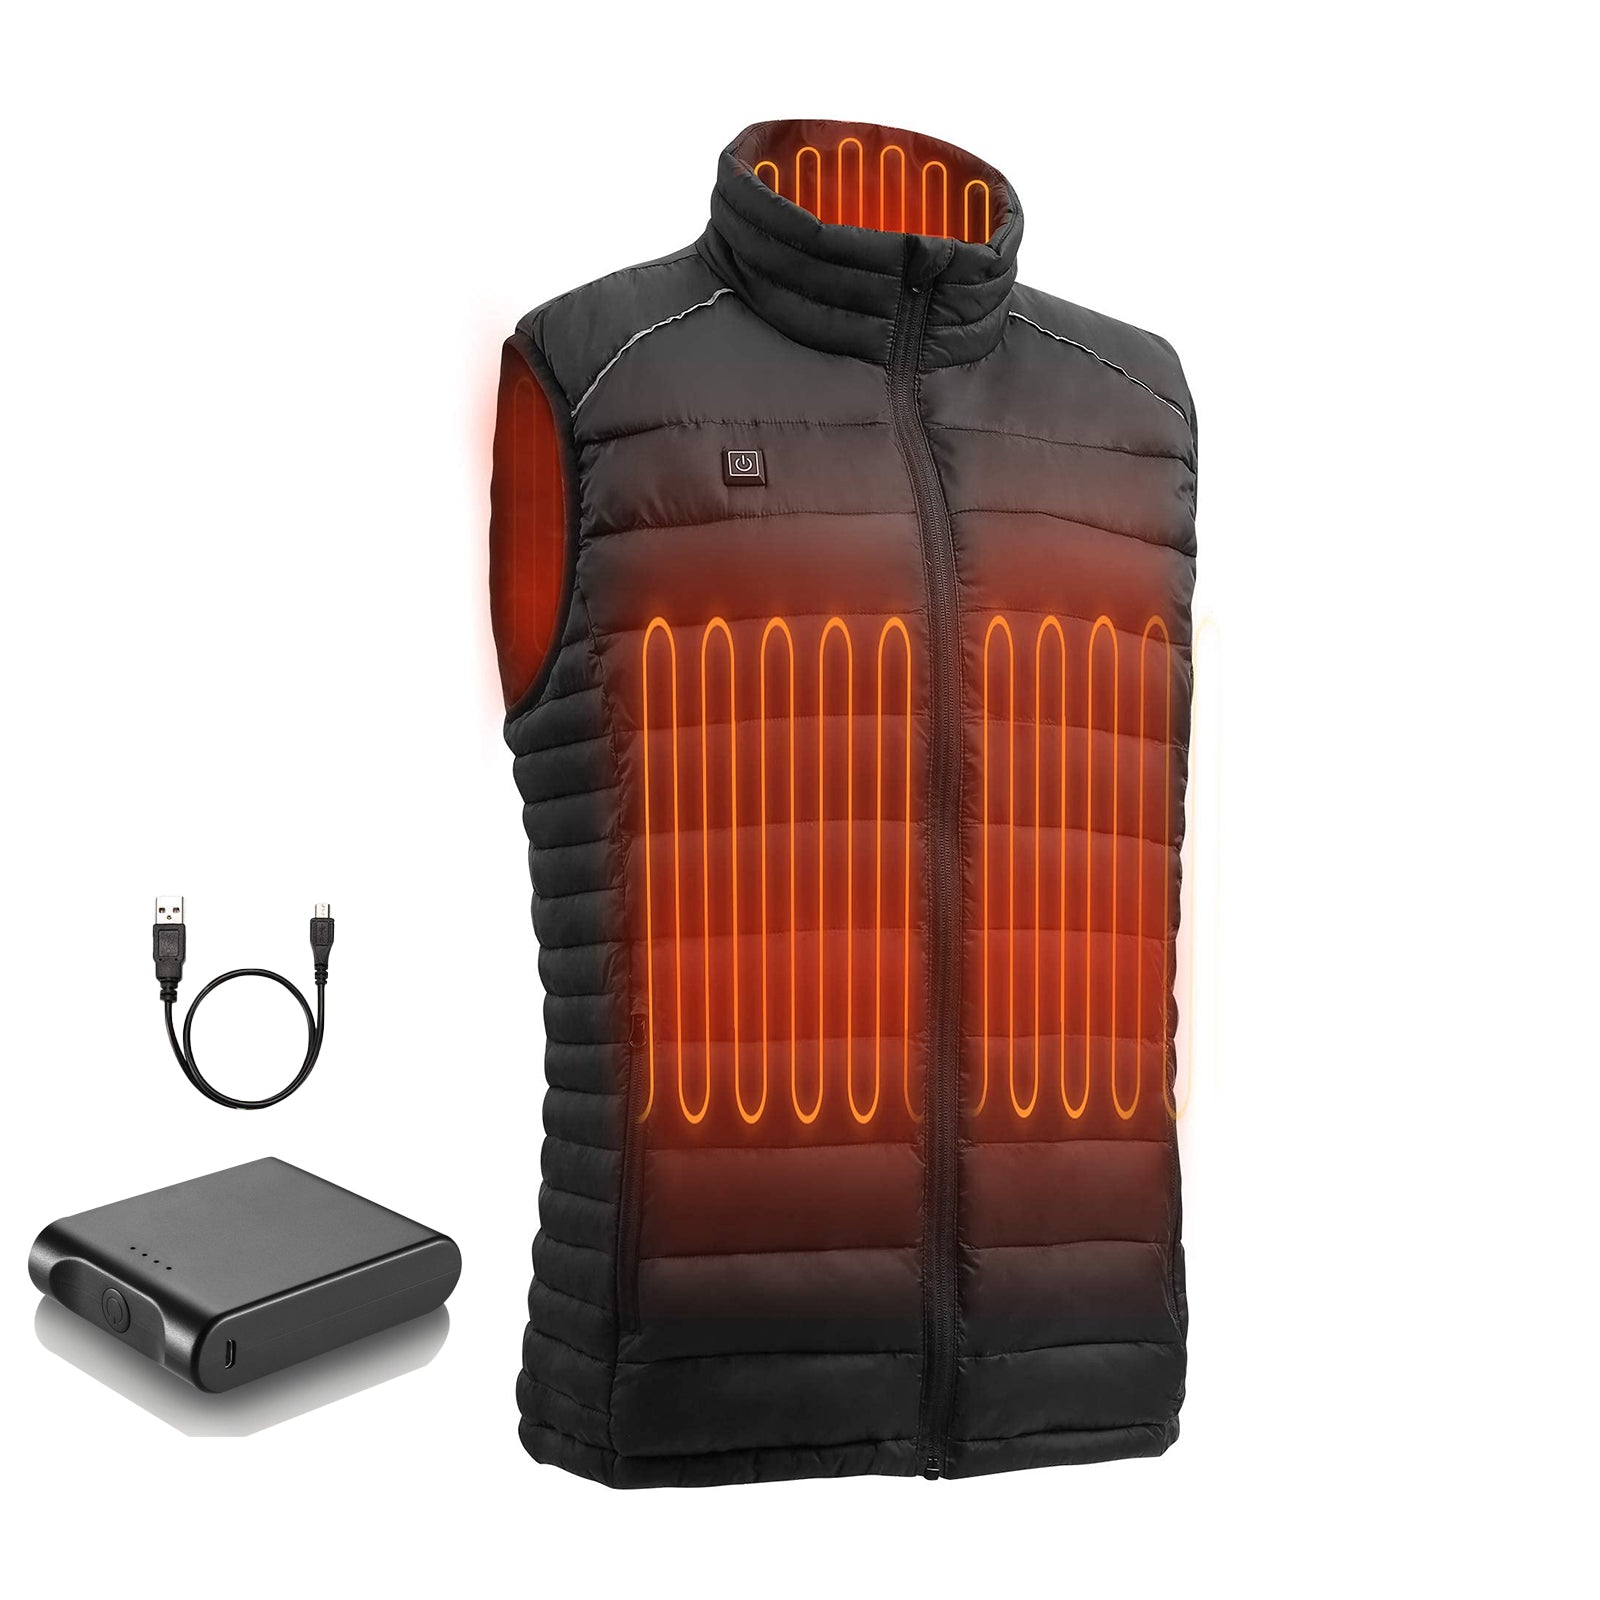 Load image into Gallery viewer, Heated Vest Lightweight Vest Jacket, Outdoor Clothes, with Fast Heating &amp; Auto-Off &amp; Battery Pack for Hunting/Hiking for Back, Neck, Shoulders for Men &amp; Women (X-Large)
